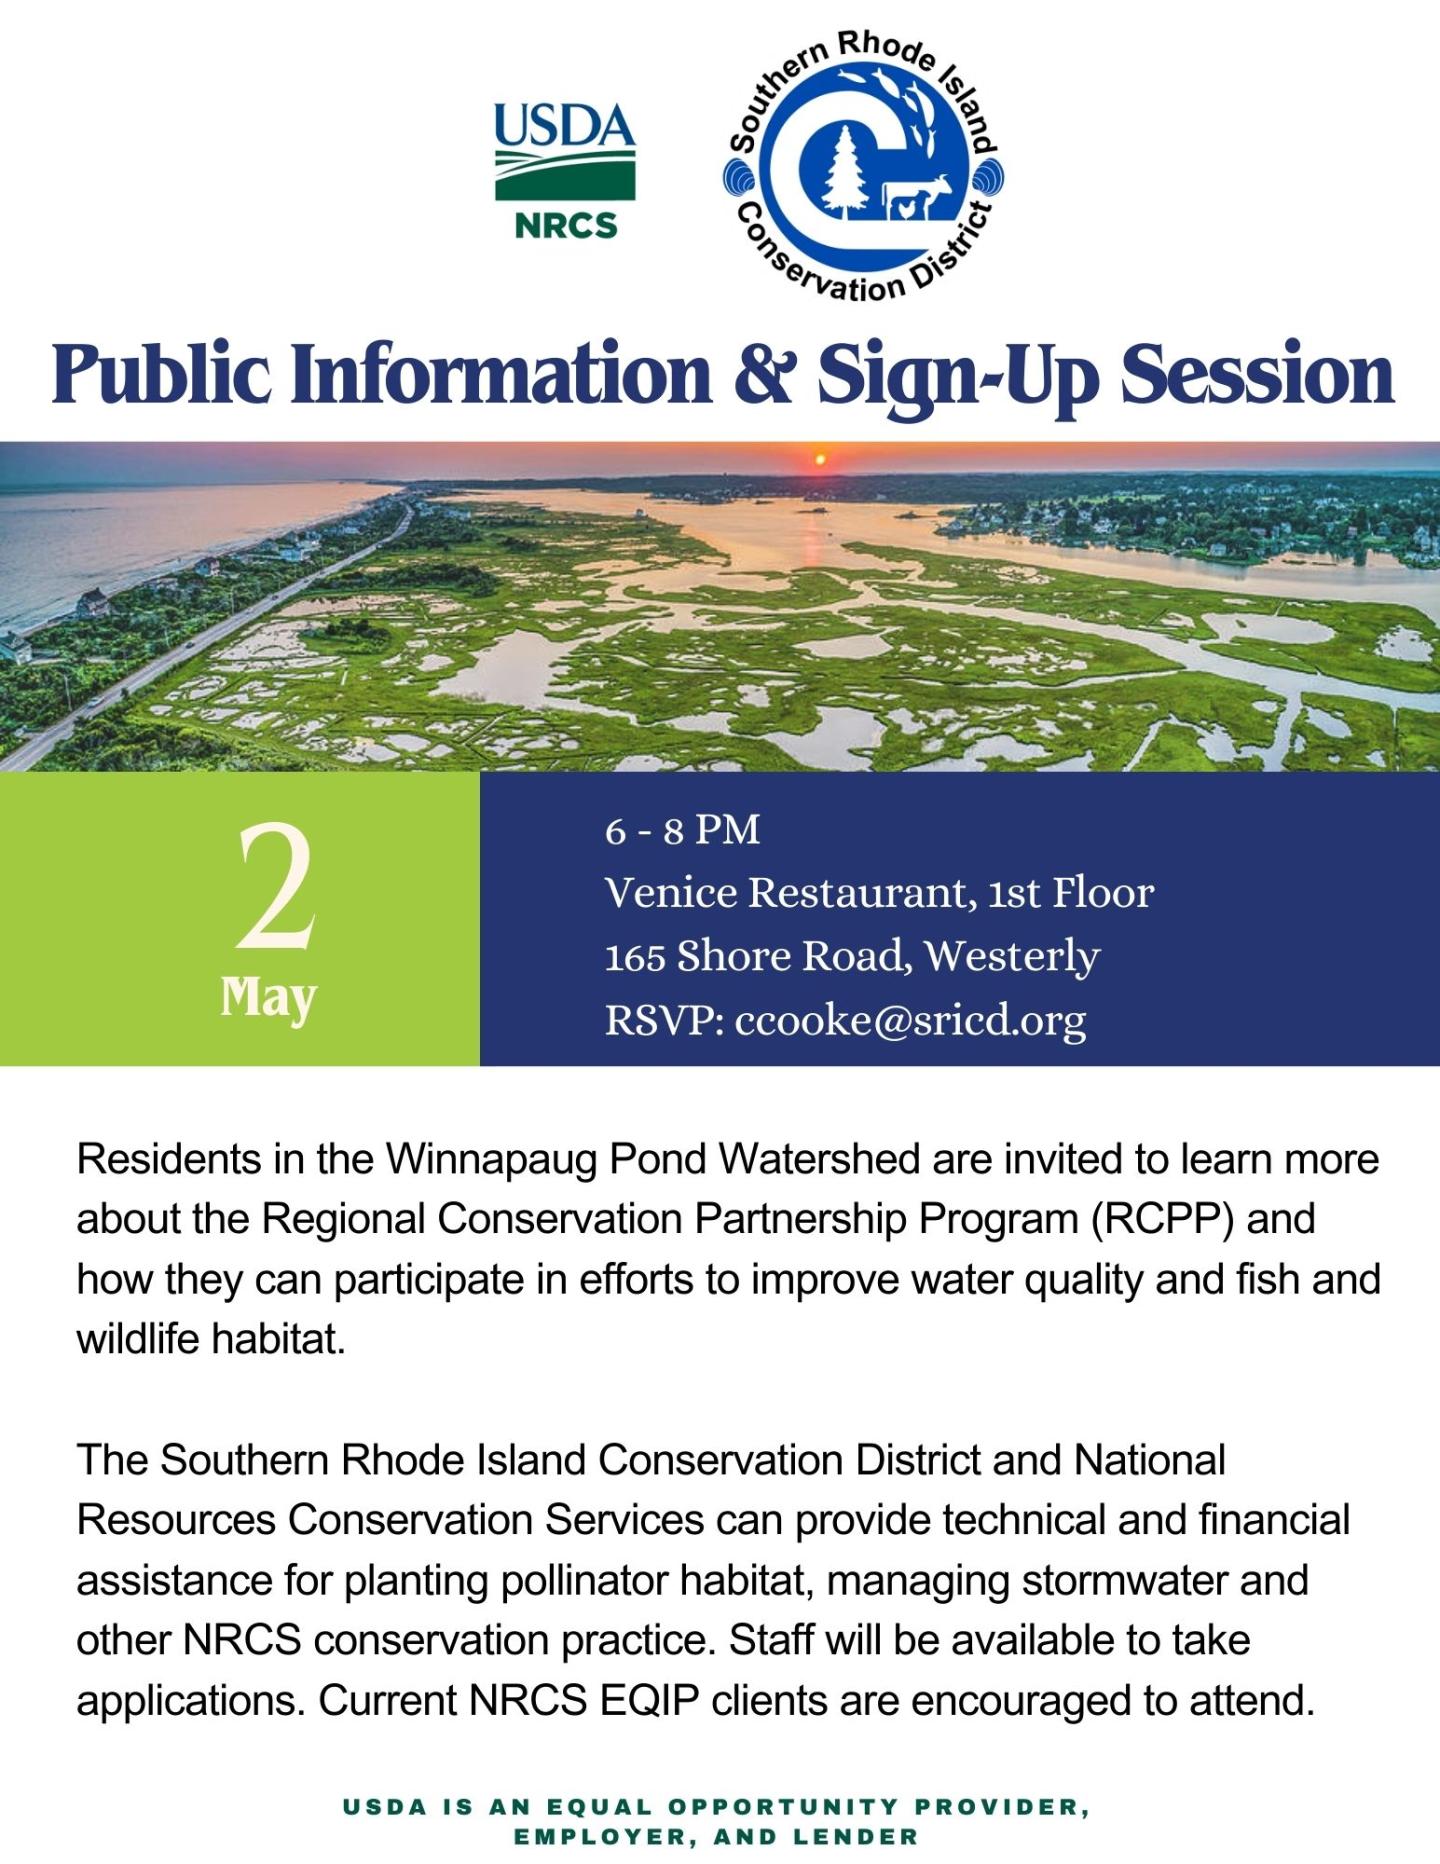 Winnapaug Pond Watershed, RI, RCPP Public Information and Sign-up Session Flyer.